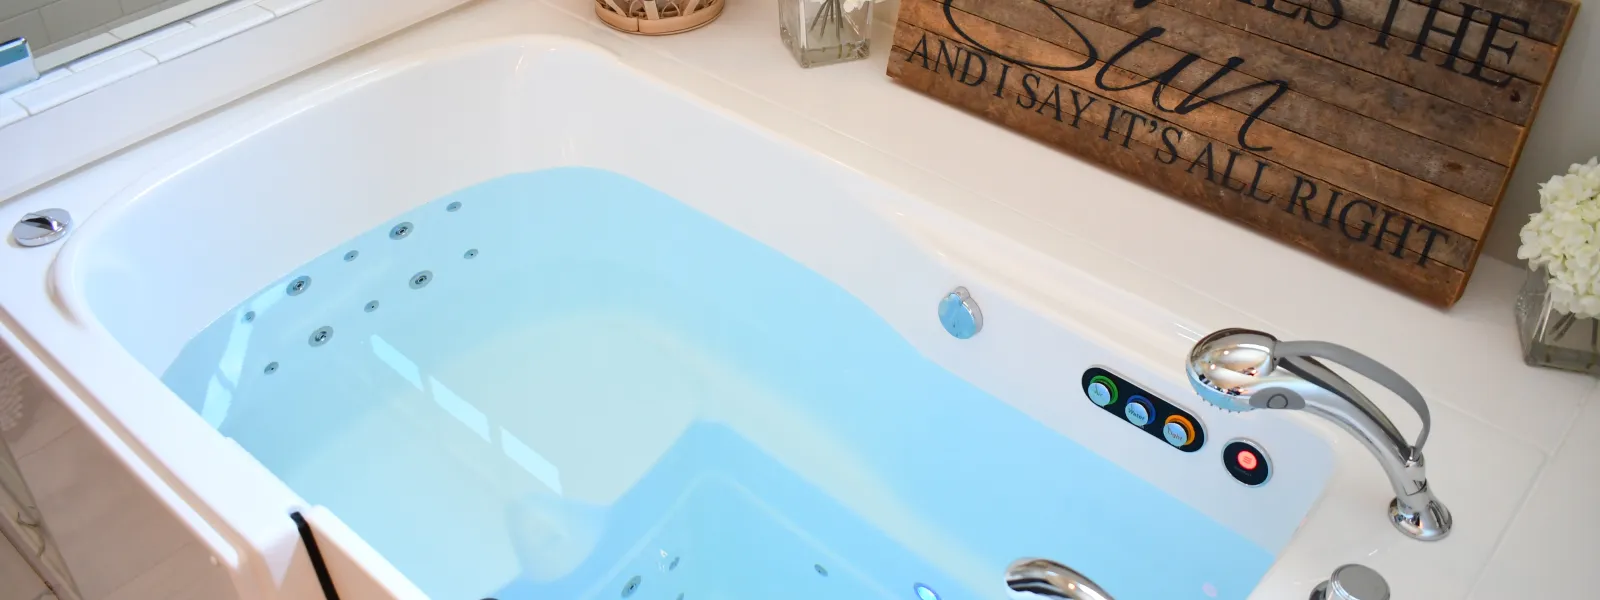 5 Things You Need To Know Before Buying a Walk-In Tub